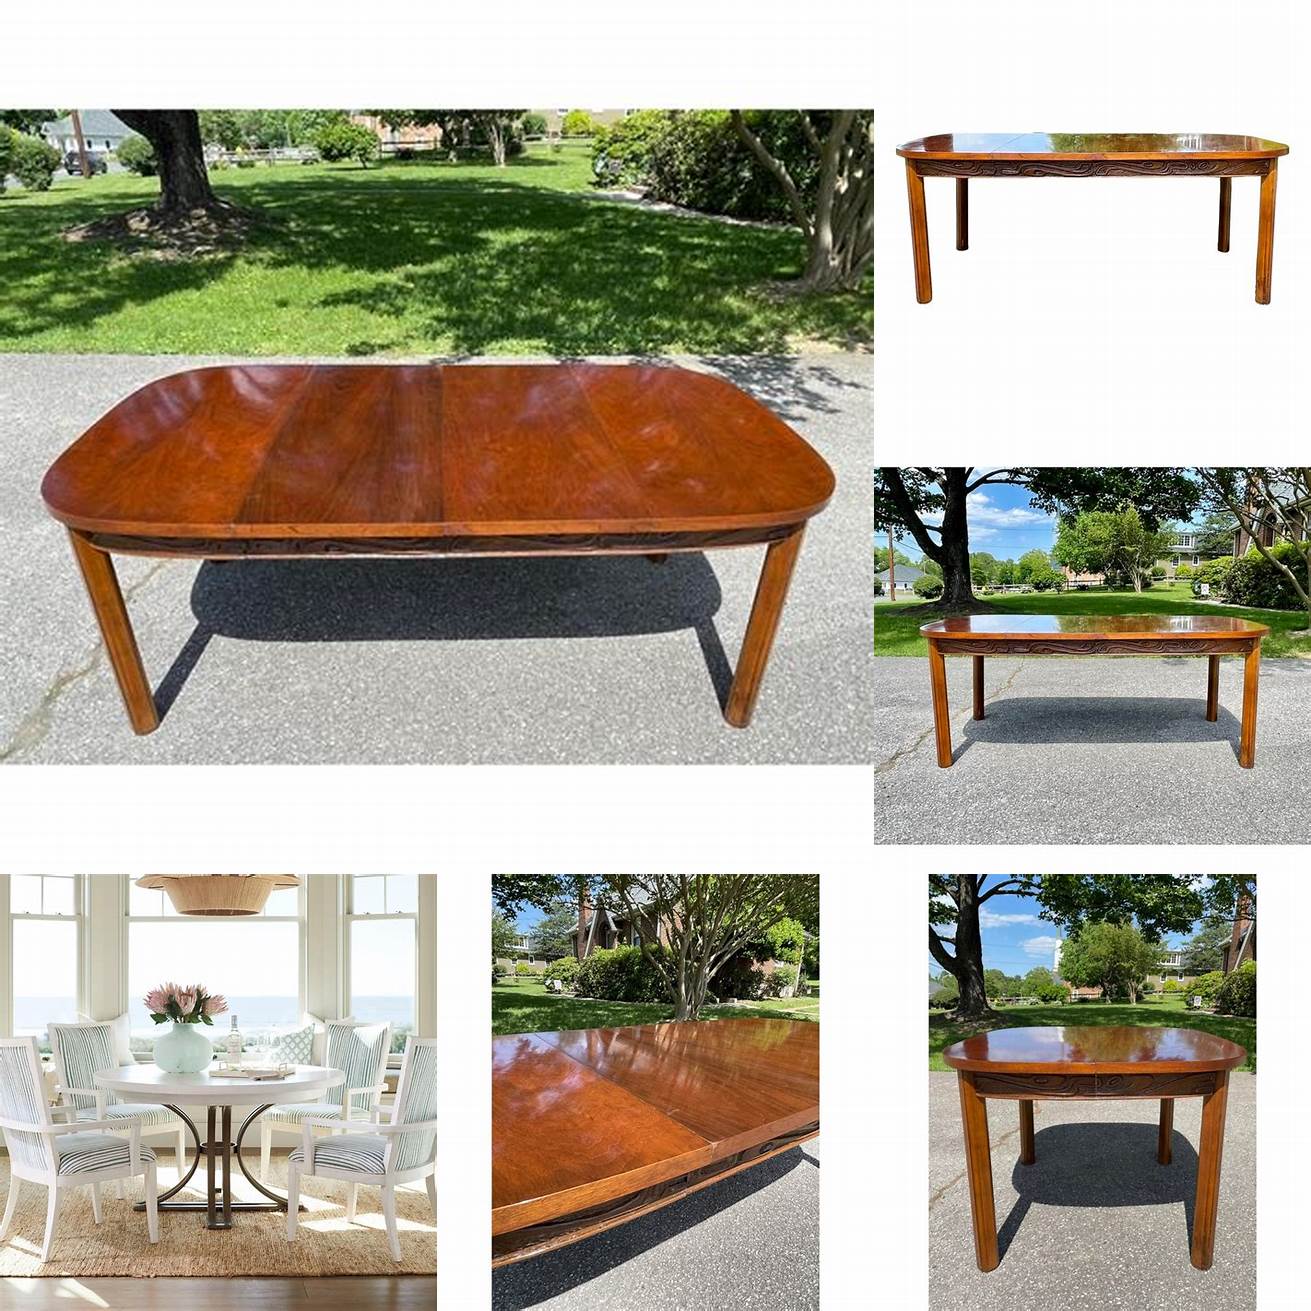 The Oceanic Dining Table